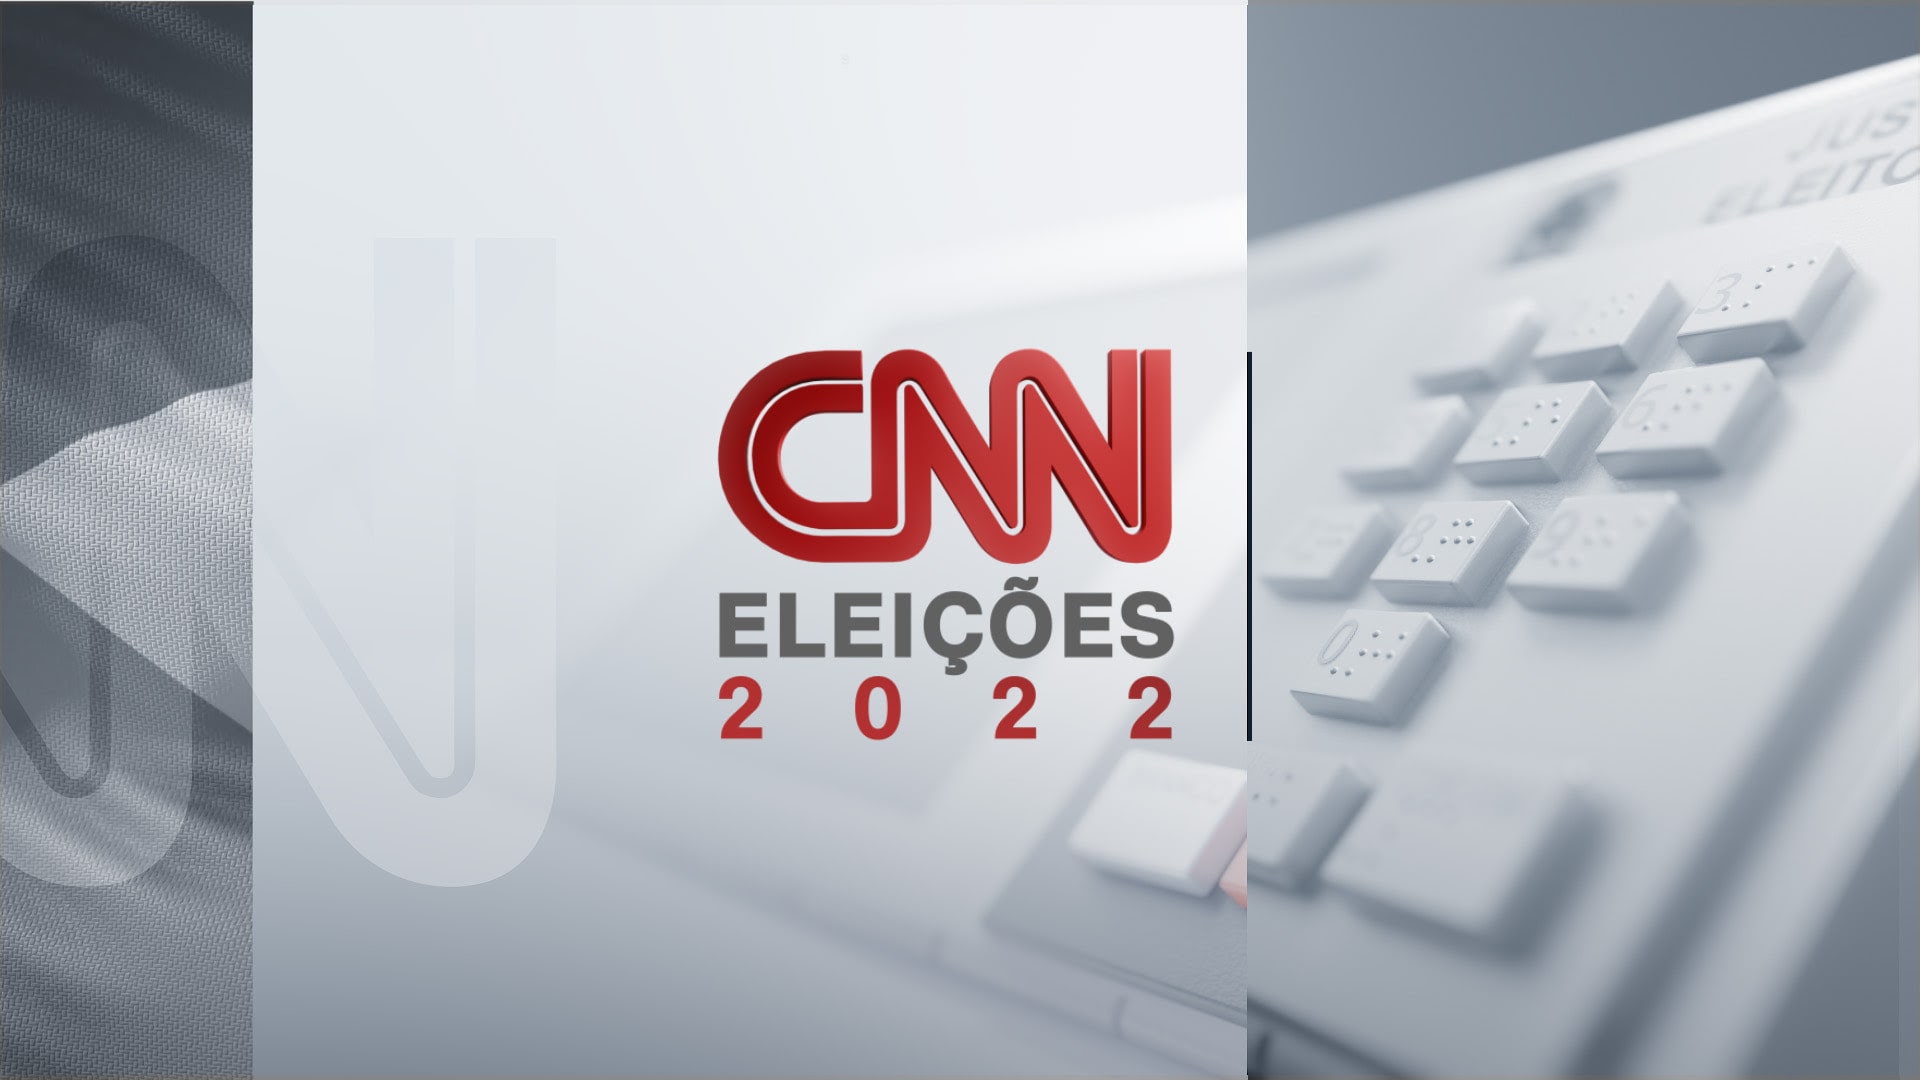 CNN Promotes With Carnal's Debut And Political Debates